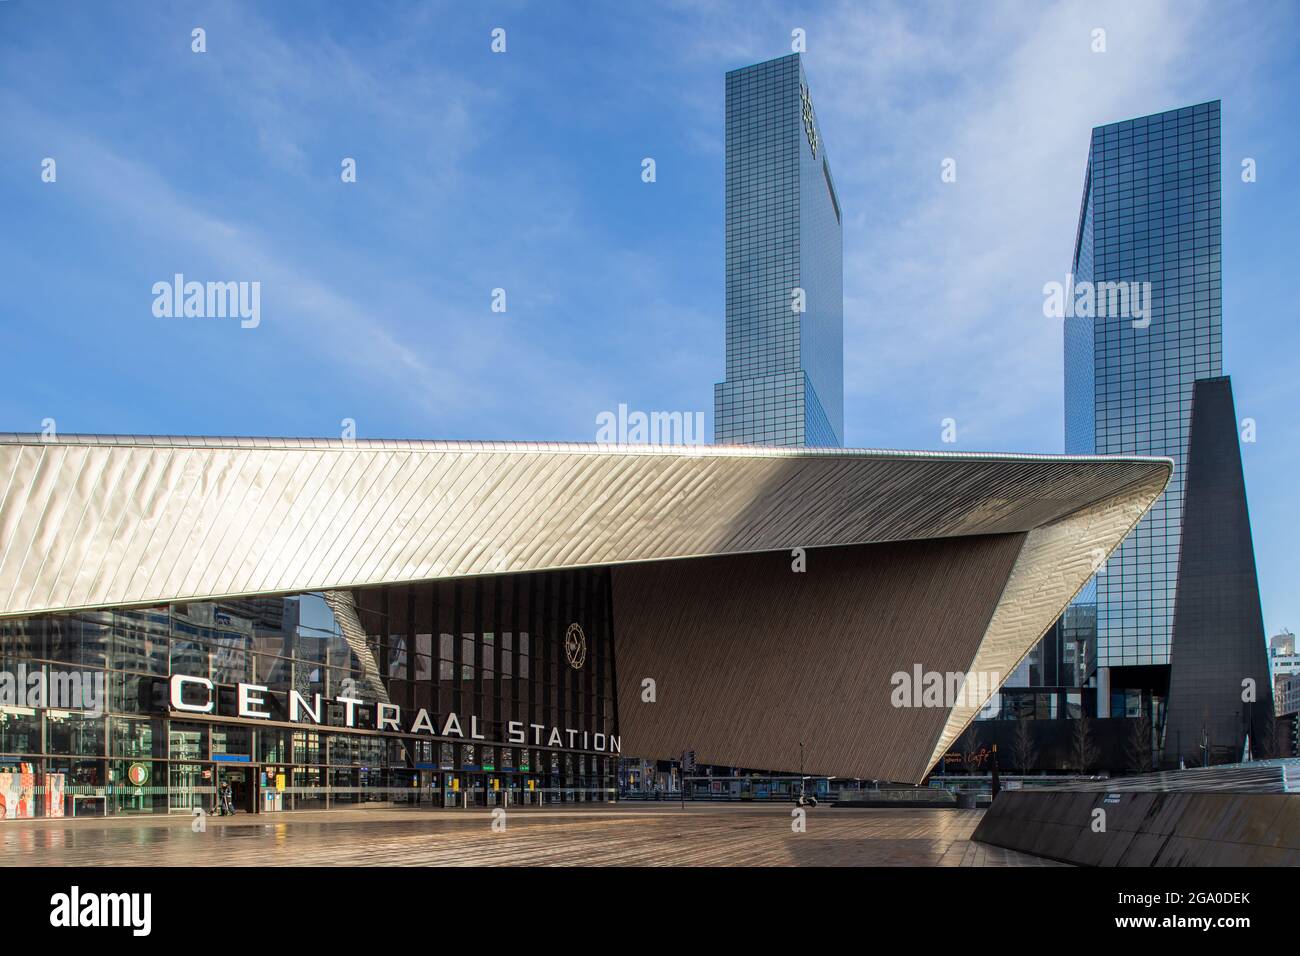 Central Station Rotterdam, Centraal Station Rotterdam, the Netherlands Stock Photo